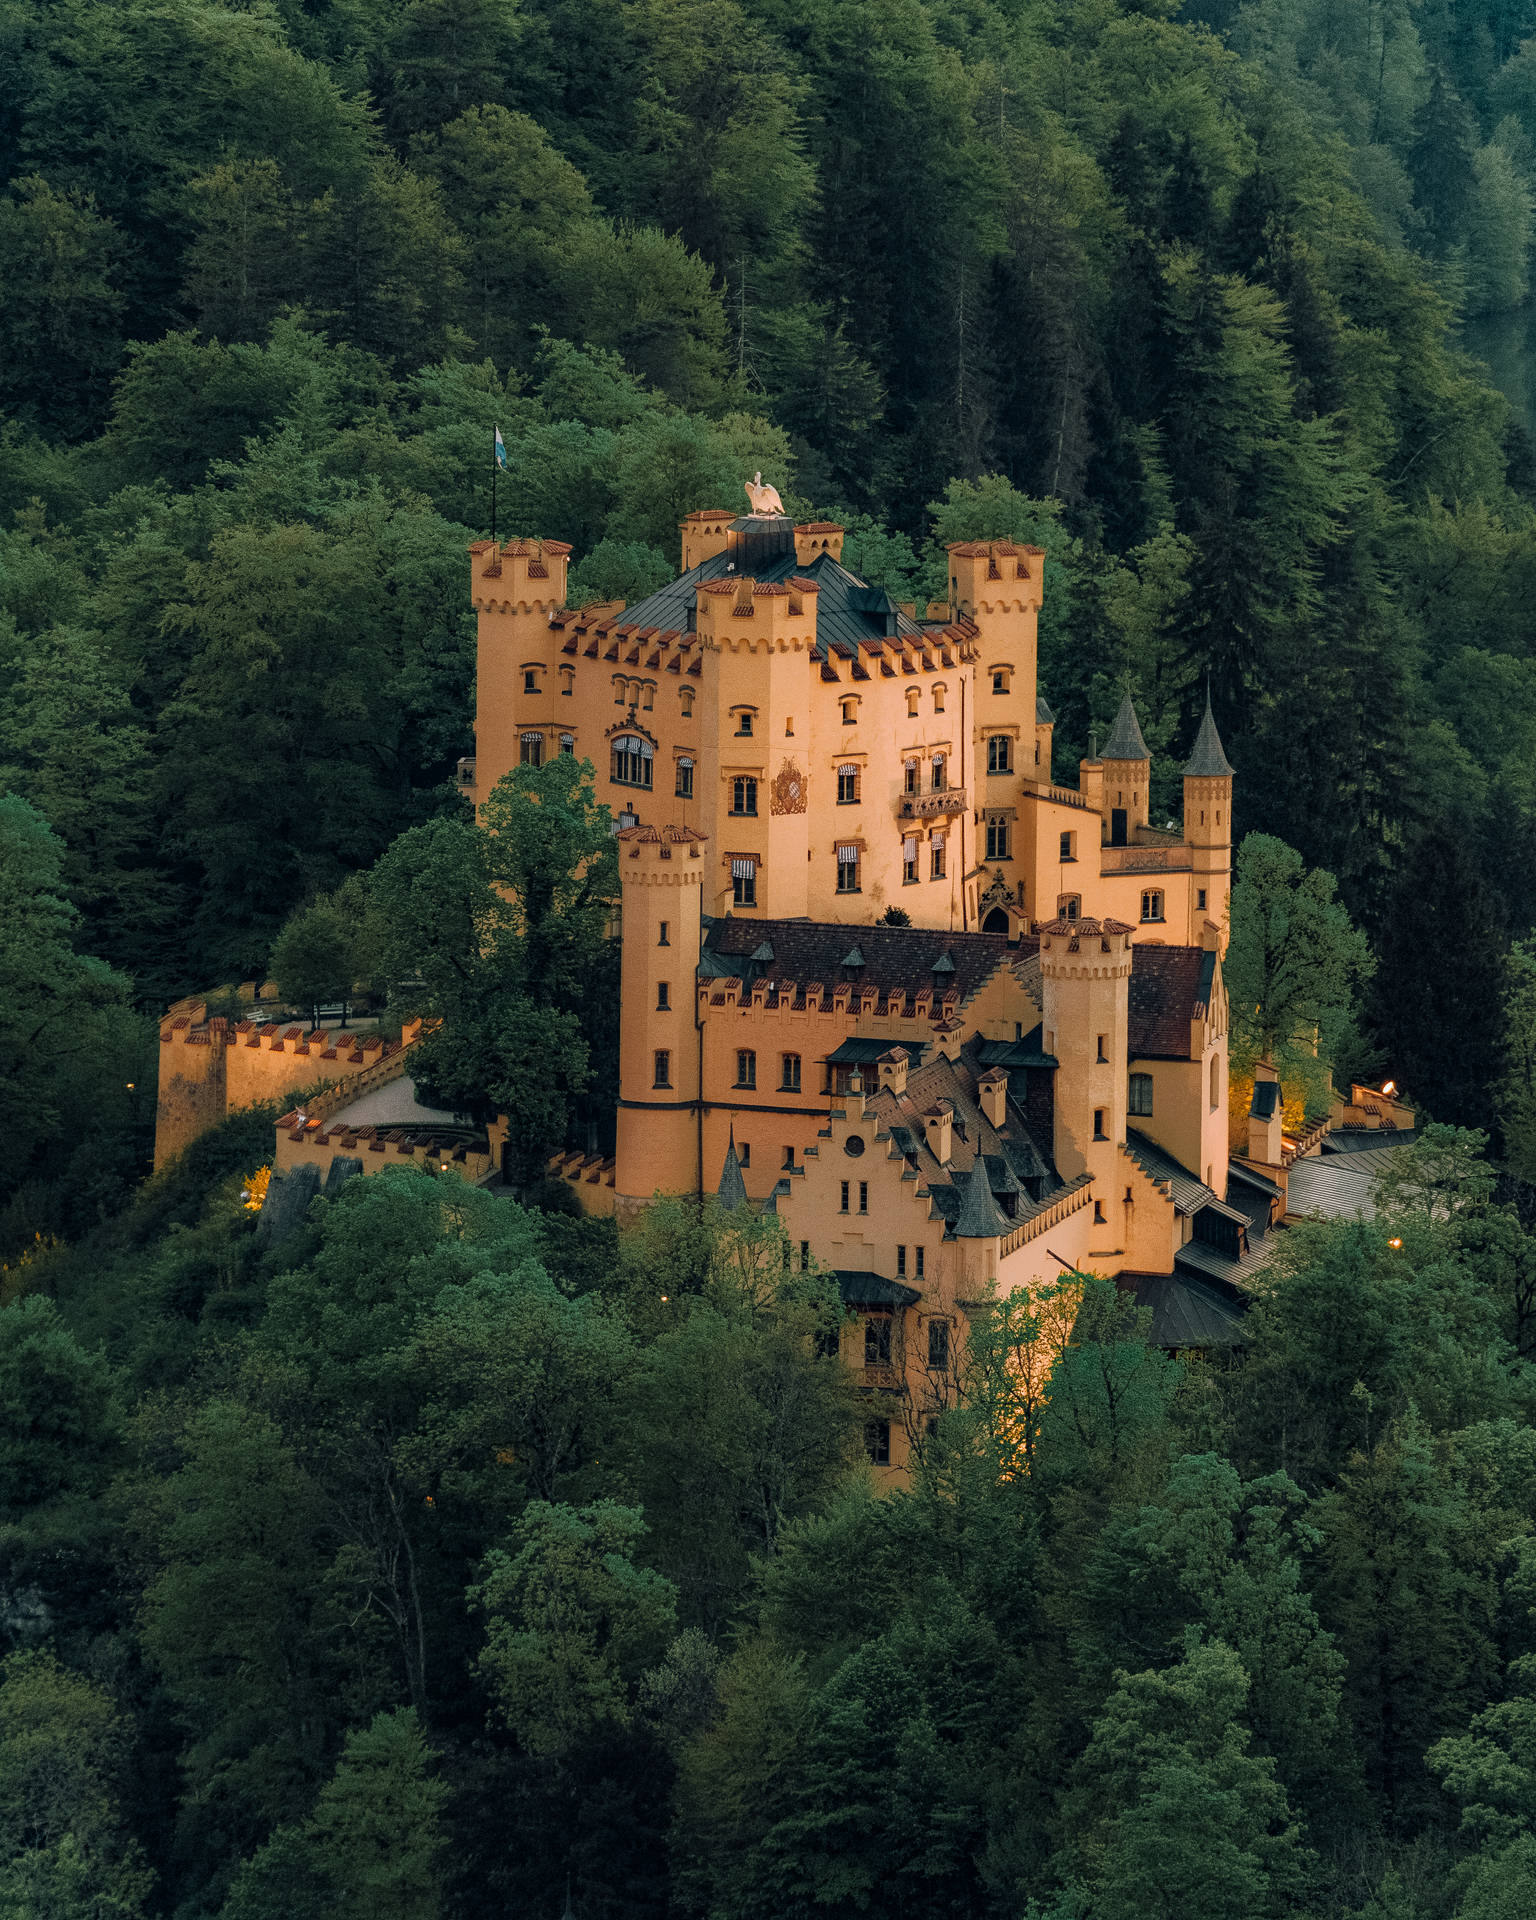 Germany's Secluded Massive Castle Background